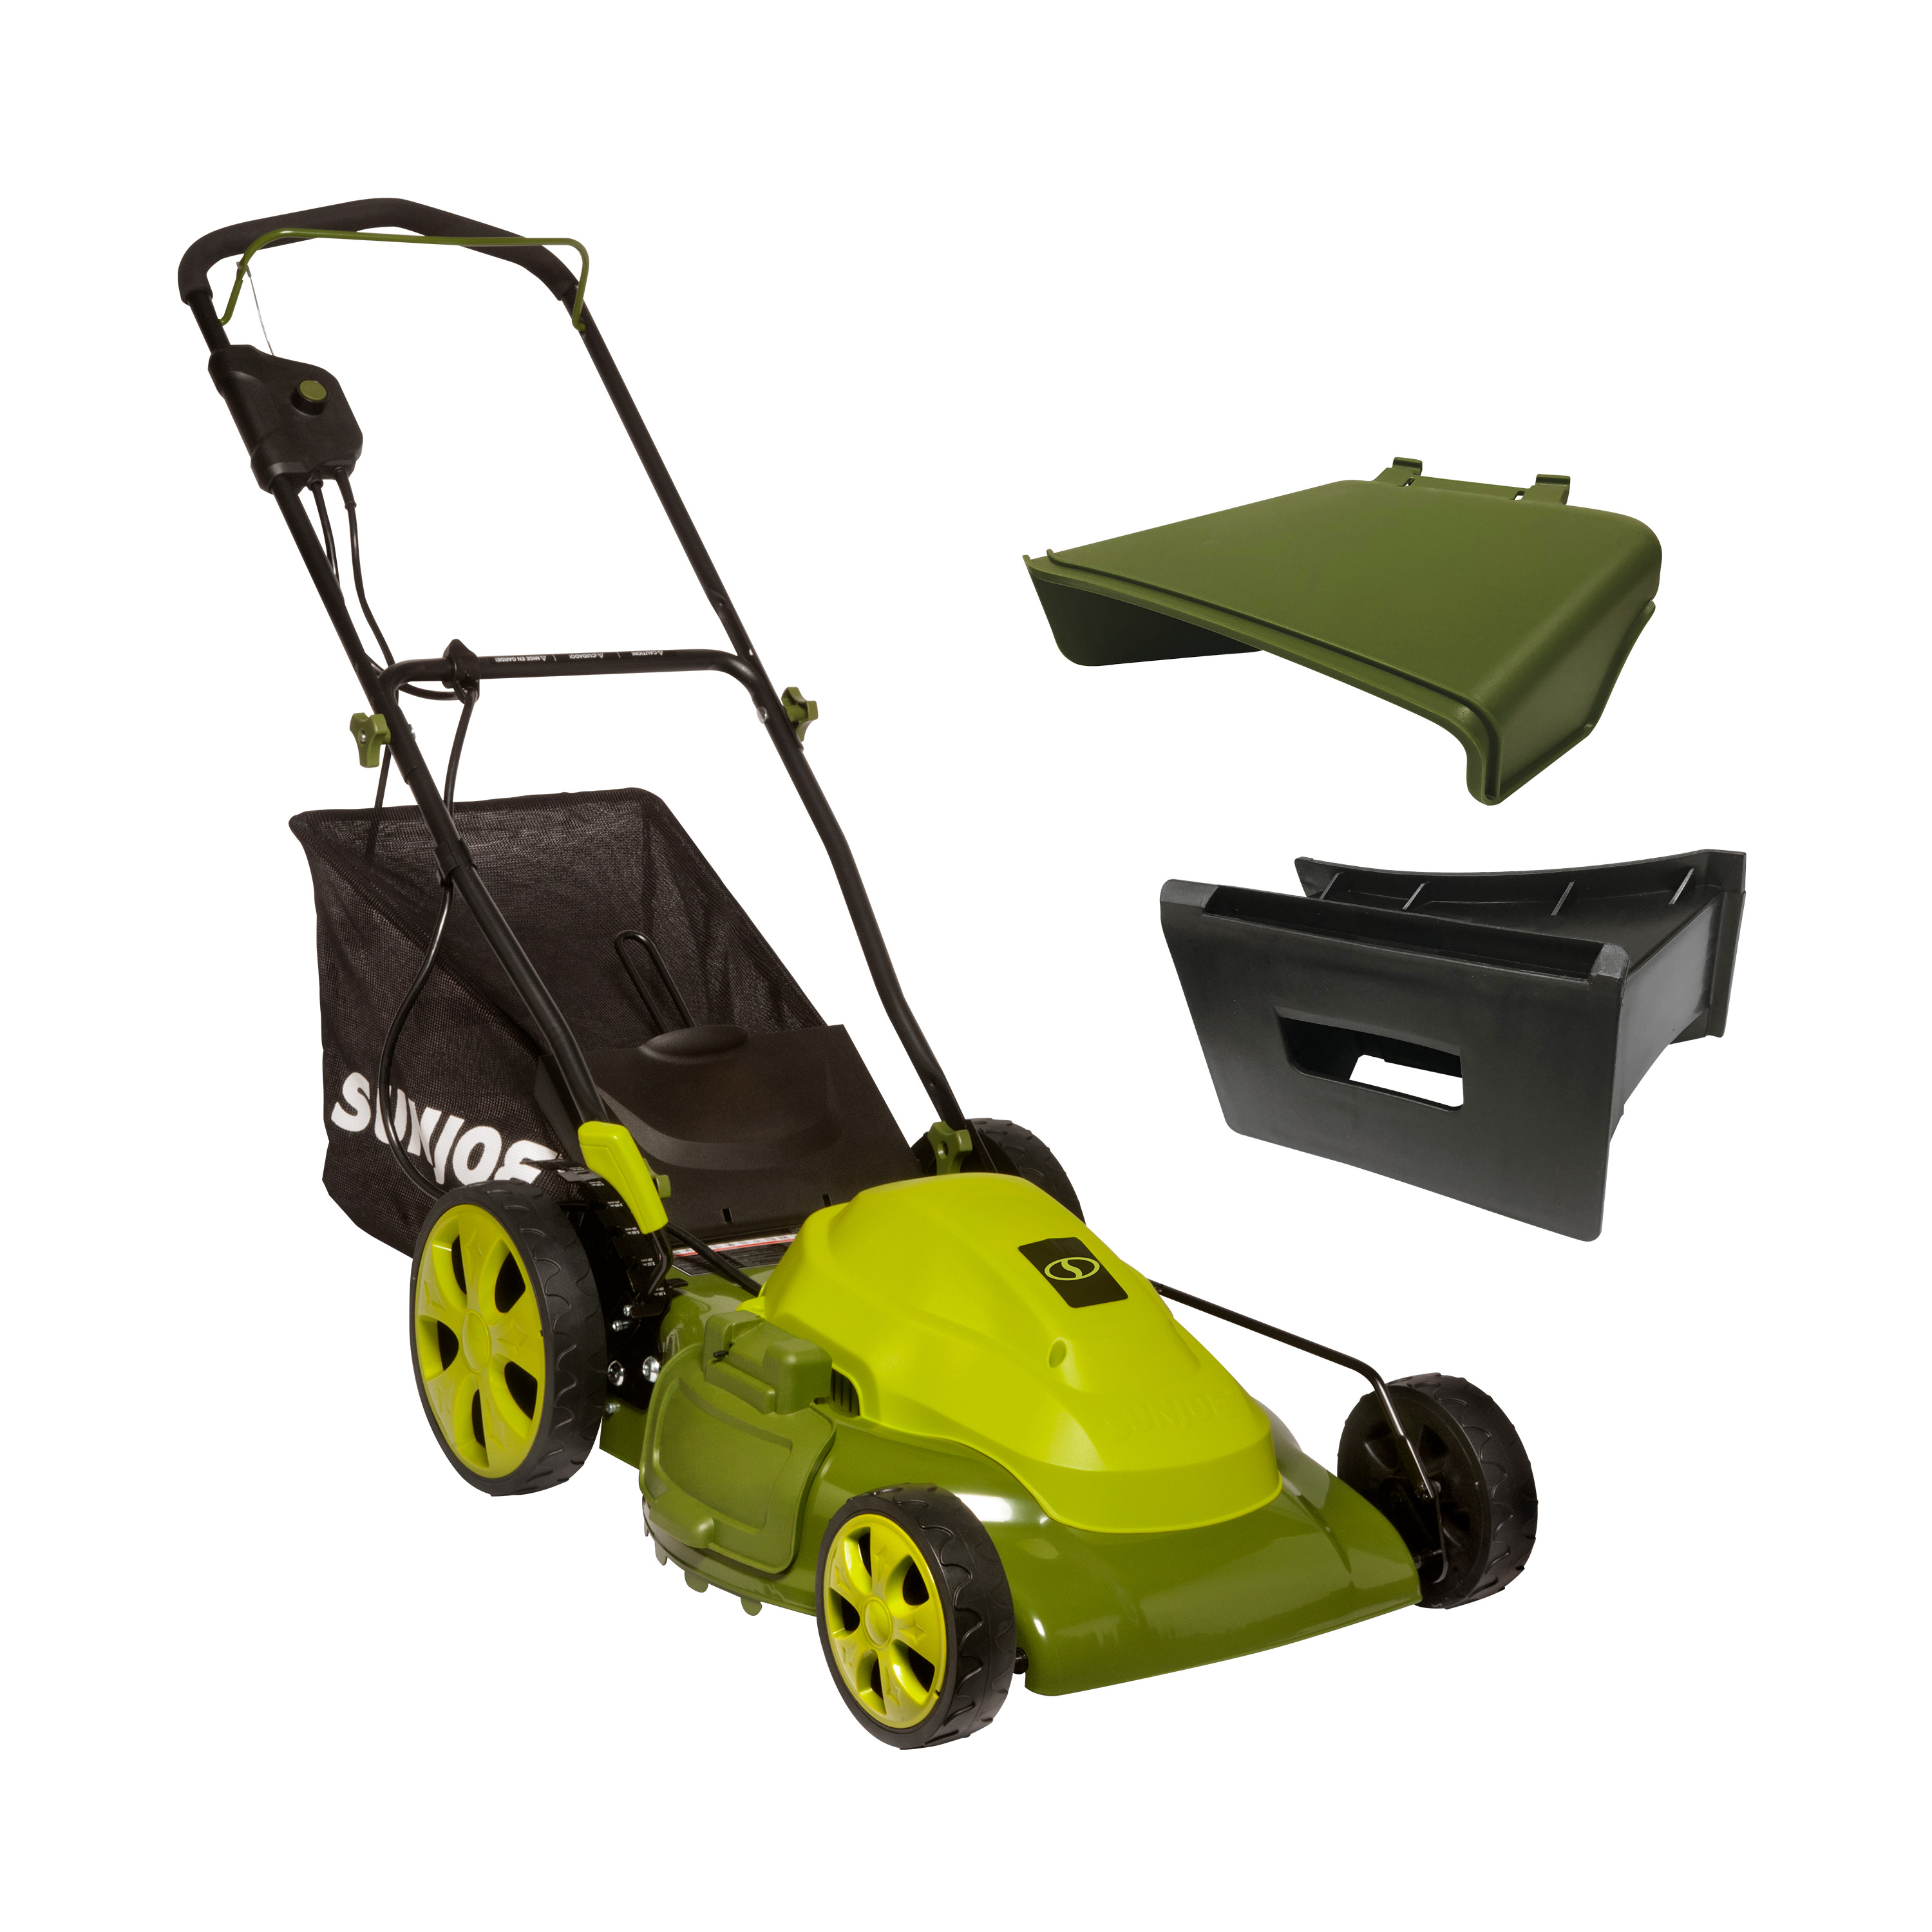 Sun Joe Electric 20-inch Lawn Mower, 12-Amp, 7-Position, W/ Bag, Mulcher, & Side Discharge - image 3 of 12